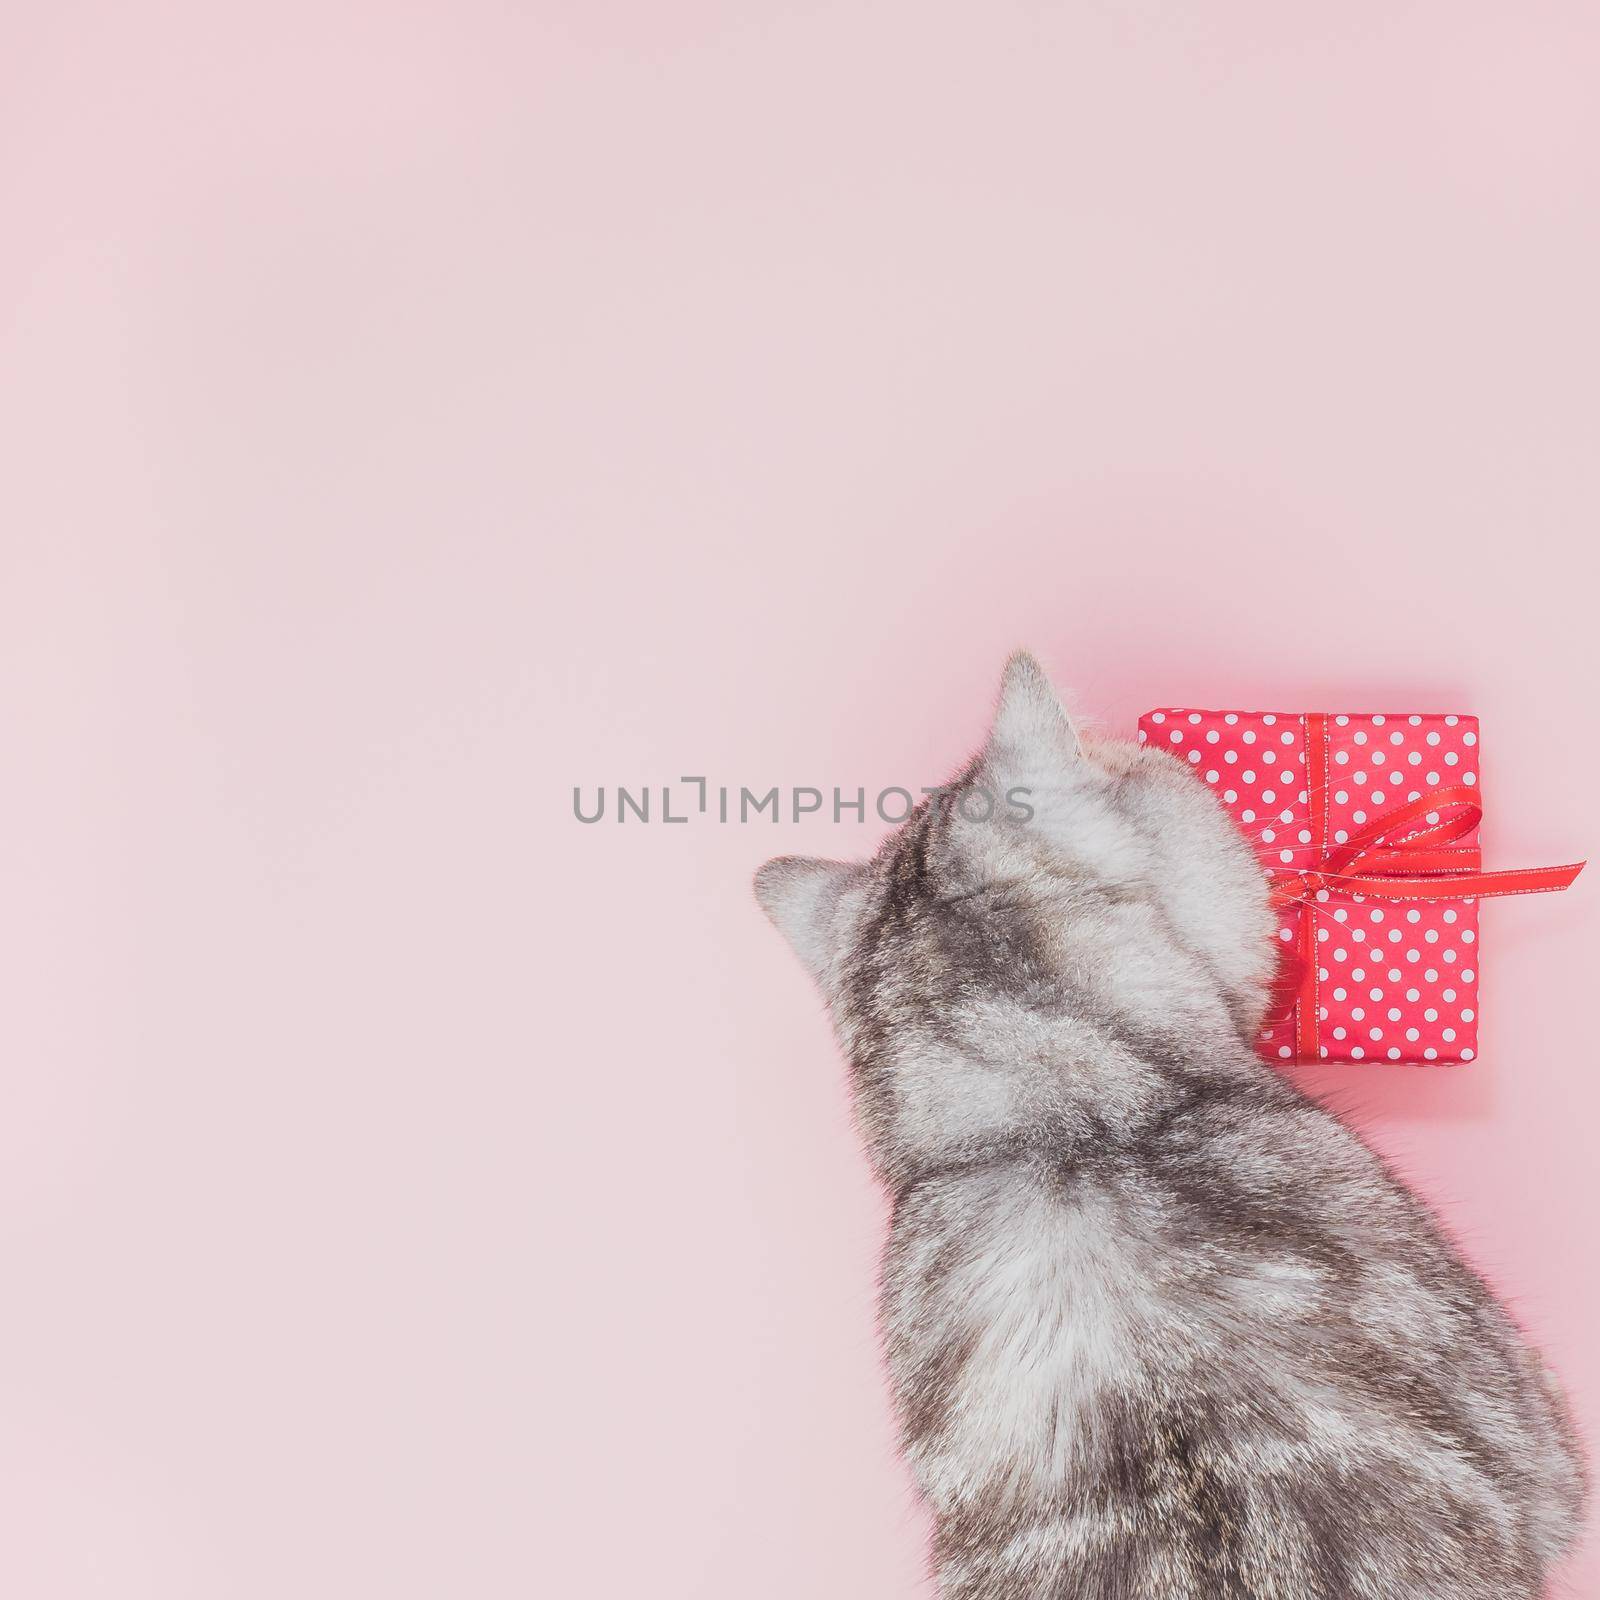 cat sitting next to the gift and looking at it, pink background, empty space for text, top view.